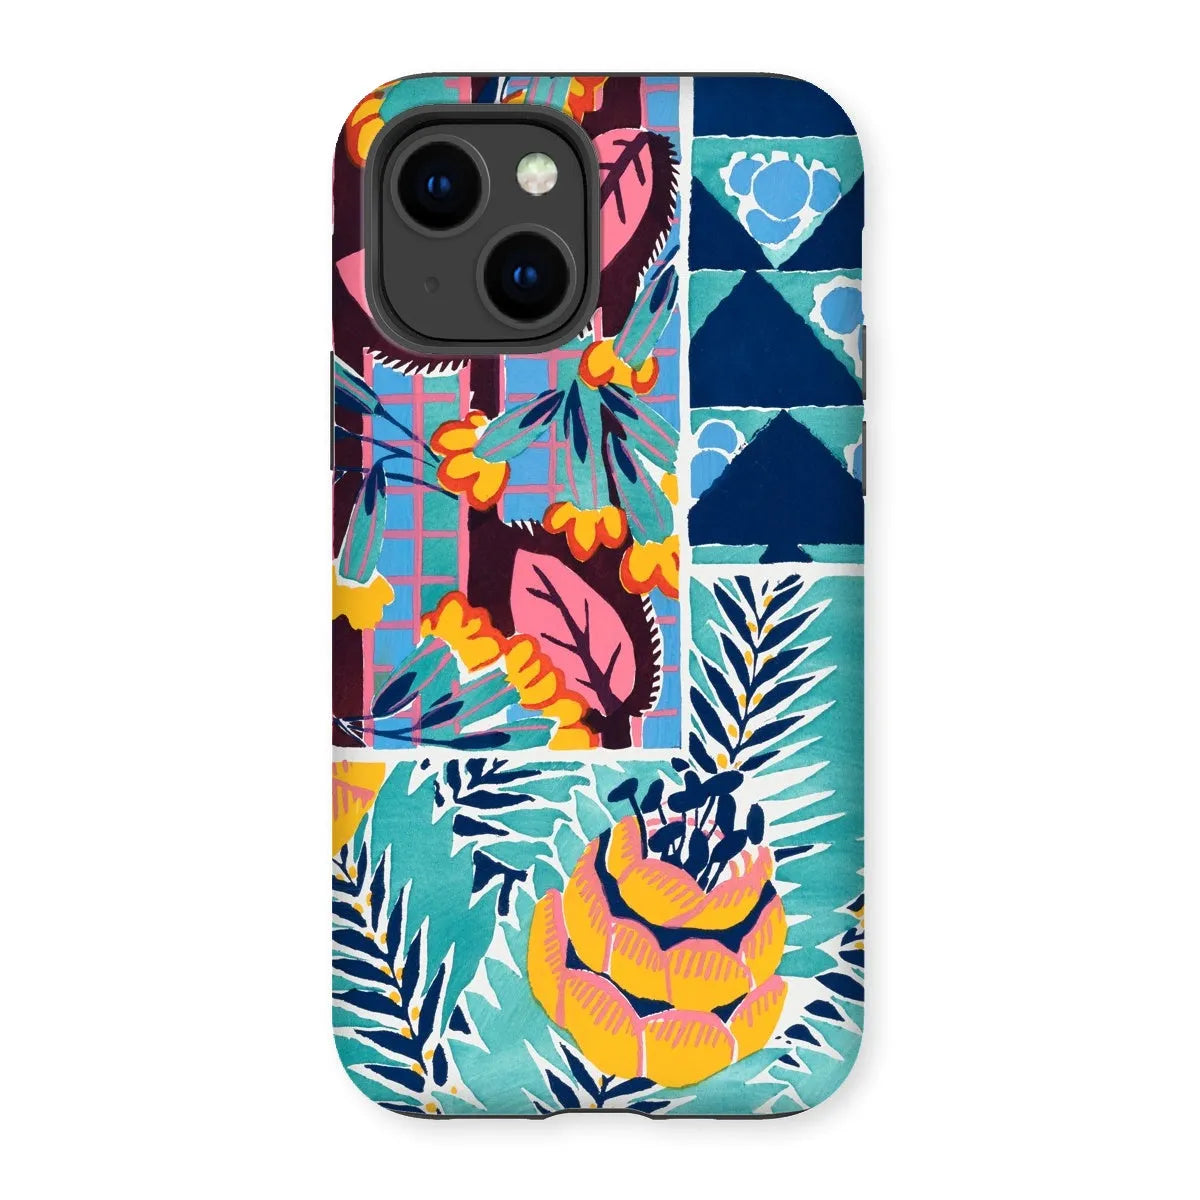 Fabric & Rugs - Pochoir Patterns Phone Case - E. A. Séguy - Iphone 14 / Matte - Mobile Phone Cases - Aesthetic Art